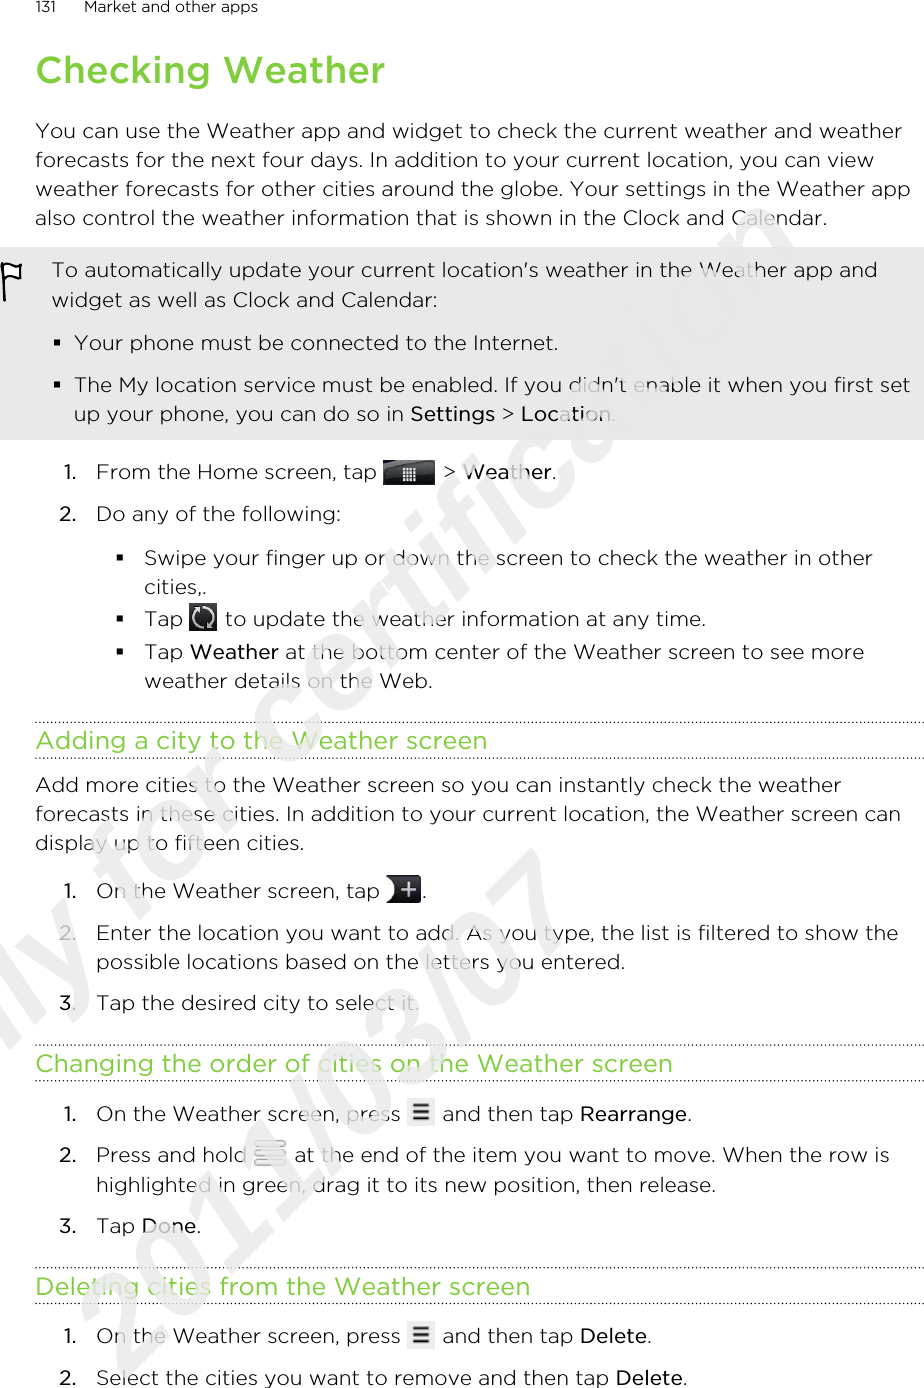 Checking WeatherYou can use the Weather app and widget to check the current weather and weatherforecasts for the next four days. In addition to your current location, you can viewweather forecasts for other cities around the globe. Your settings in the Weather appalso control the weather information that is shown in the Clock and Calendar.To automatically update your current location&apos;s weather in the Weather app andwidget as well as Clock and Calendar:§Your phone must be connected to the Internet.§The My location service must be enabled. If you didn&apos;t enable it when you first setup your phone, you can do so in Settings &gt; Location.1. From the Home screen, tap   &gt; Weather.2. Do any of the following:§Swipe your finger up or down the screen to check the weather in othercities,.§Tap   to update the weather information at any time.§Tap Weather at the bottom center of the Weather screen to see moreweather details on the Web.Adding a city to the Weather screenAdd more cities to the Weather screen so you can instantly check the weatherforecasts in these cities. In addition to your current location, the Weather screen candisplay up to fifteen cities.1. On the Weather screen, tap  .2. Enter the location you want to add. As you type, the list is filtered to show thepossible locations based on the letters you entered.3. Tap the desired city to select it.Changing the order of cities on the Weather screen1. On the Weather screen, press   and then tap Rearrange.2. Press and hold   at the end of the item you want to move. When the row ishighlighted in green, drag it to its new position, then release.3. Tap Done.Deleting cities from the Weather screen1. On the Weather screen, press   and then tap Delete.2. Select the cities you want to remove and then tap Delete.131 Market and other appsOnly for certification  2011/03/07